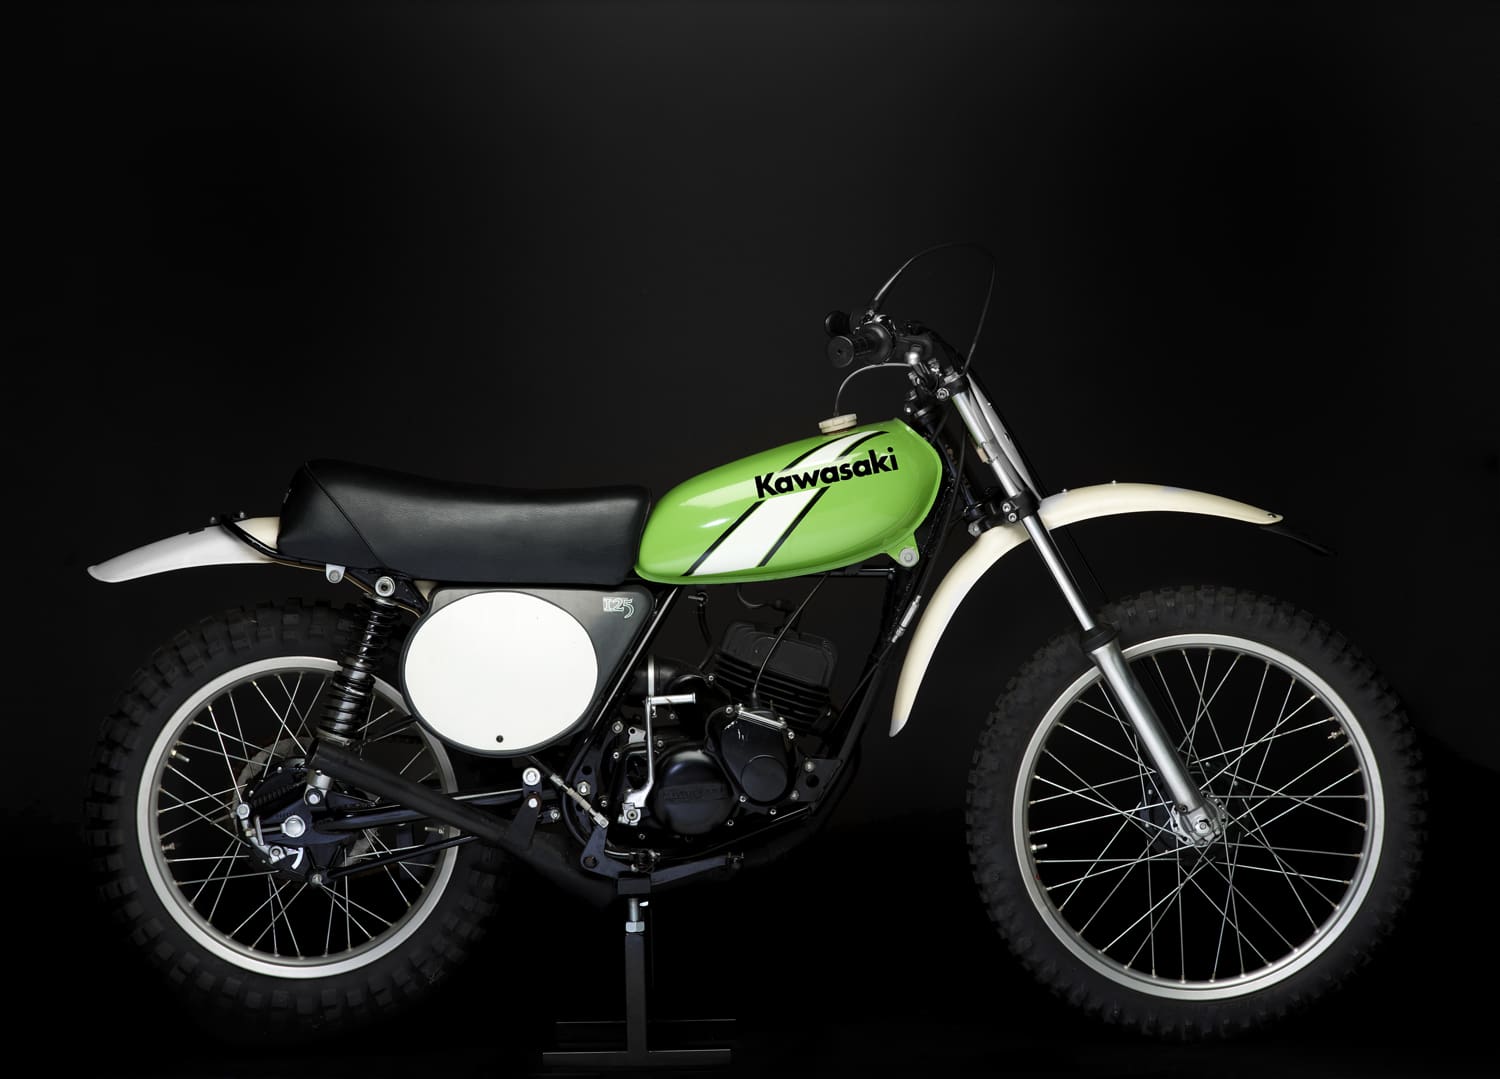 A green dirt bike is on display against a black background.